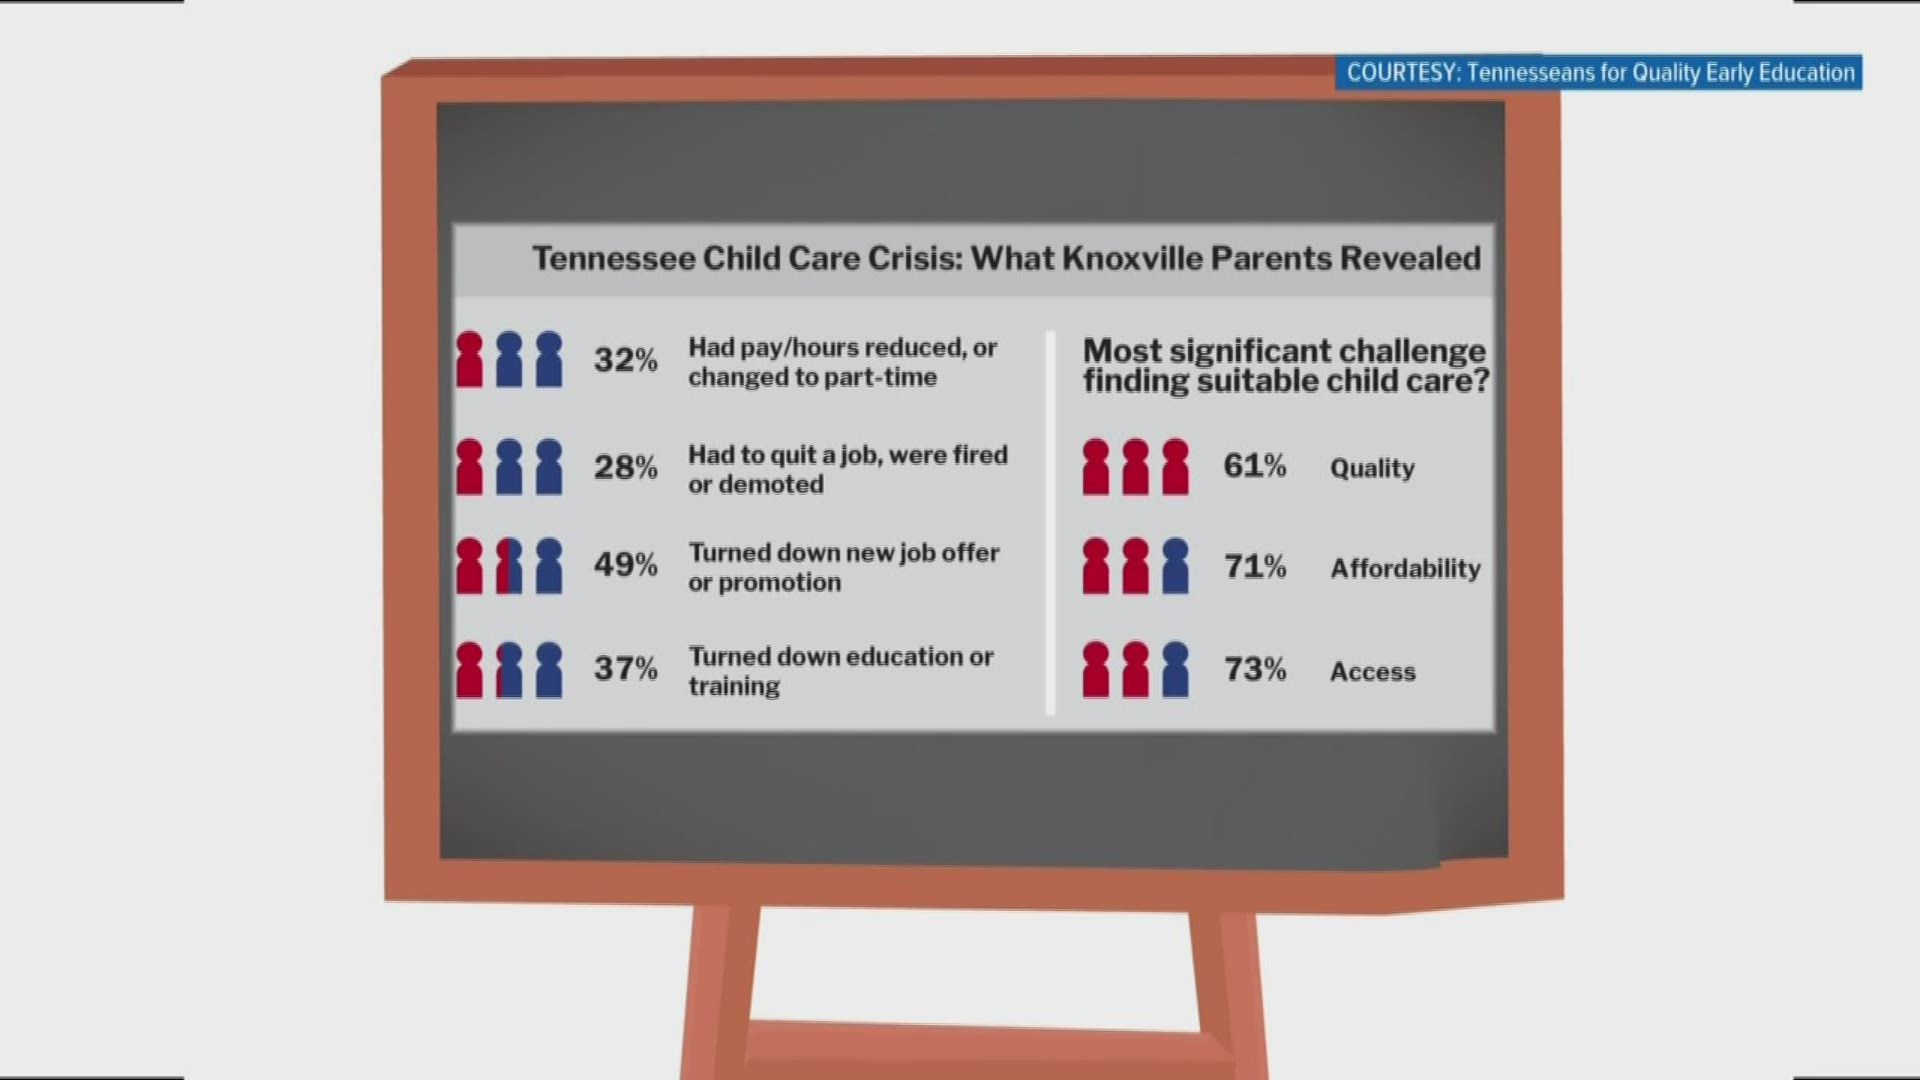 Tennesseans for Quality Early Education found Knoxville loses $122 million in earnings and revenue each year due to high child care costs and lack of access.